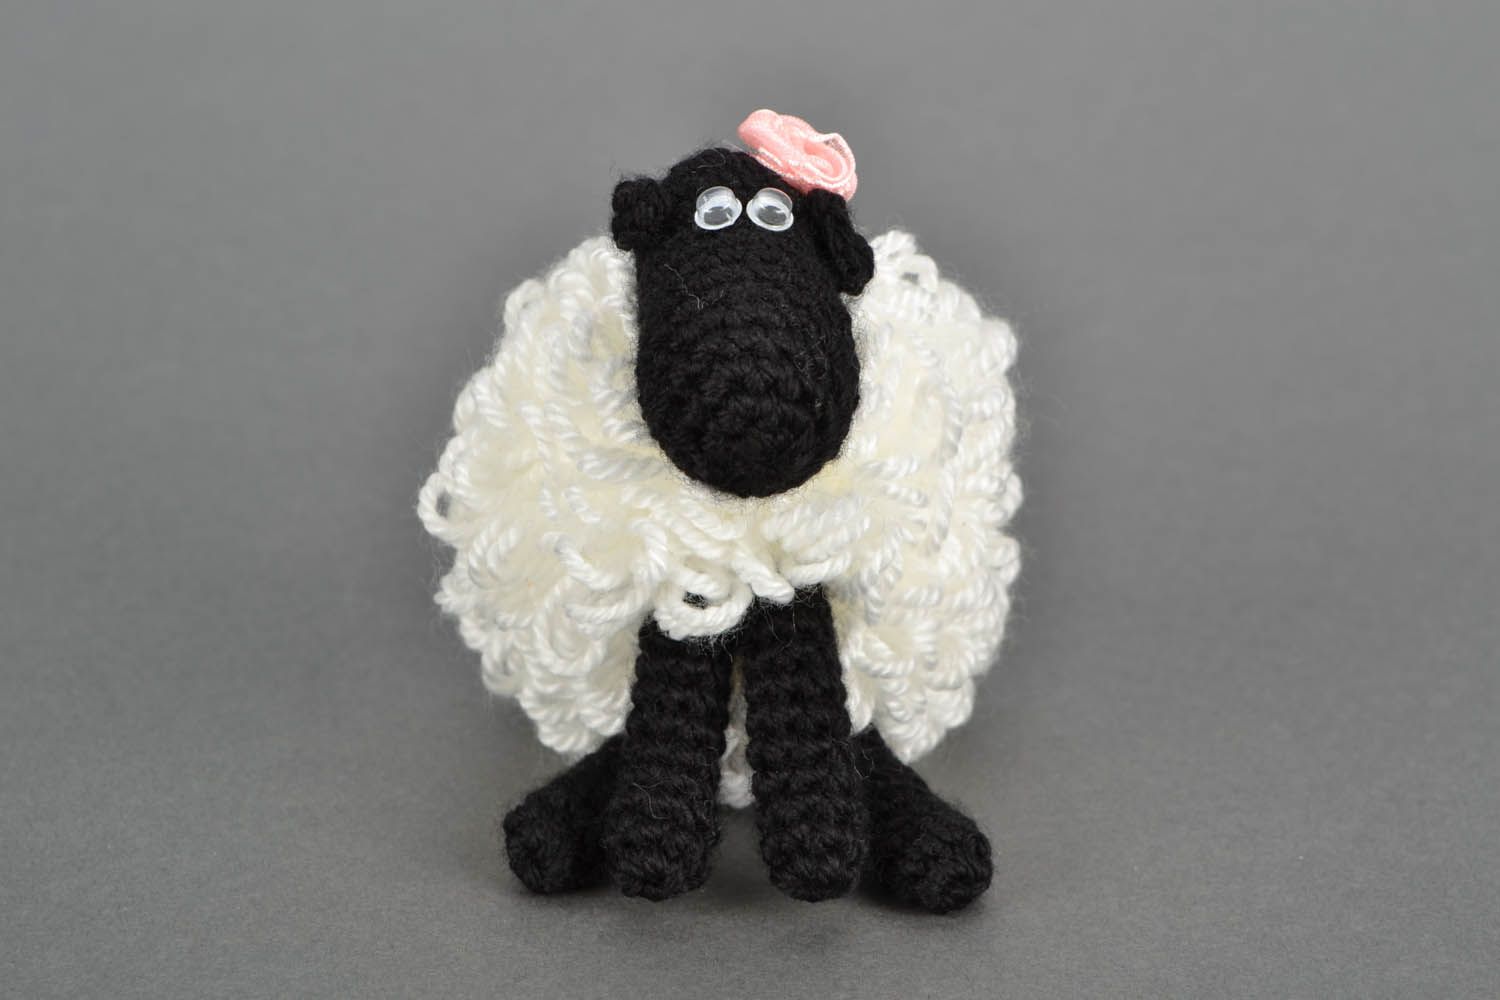 Soft crocheted toy photo 3